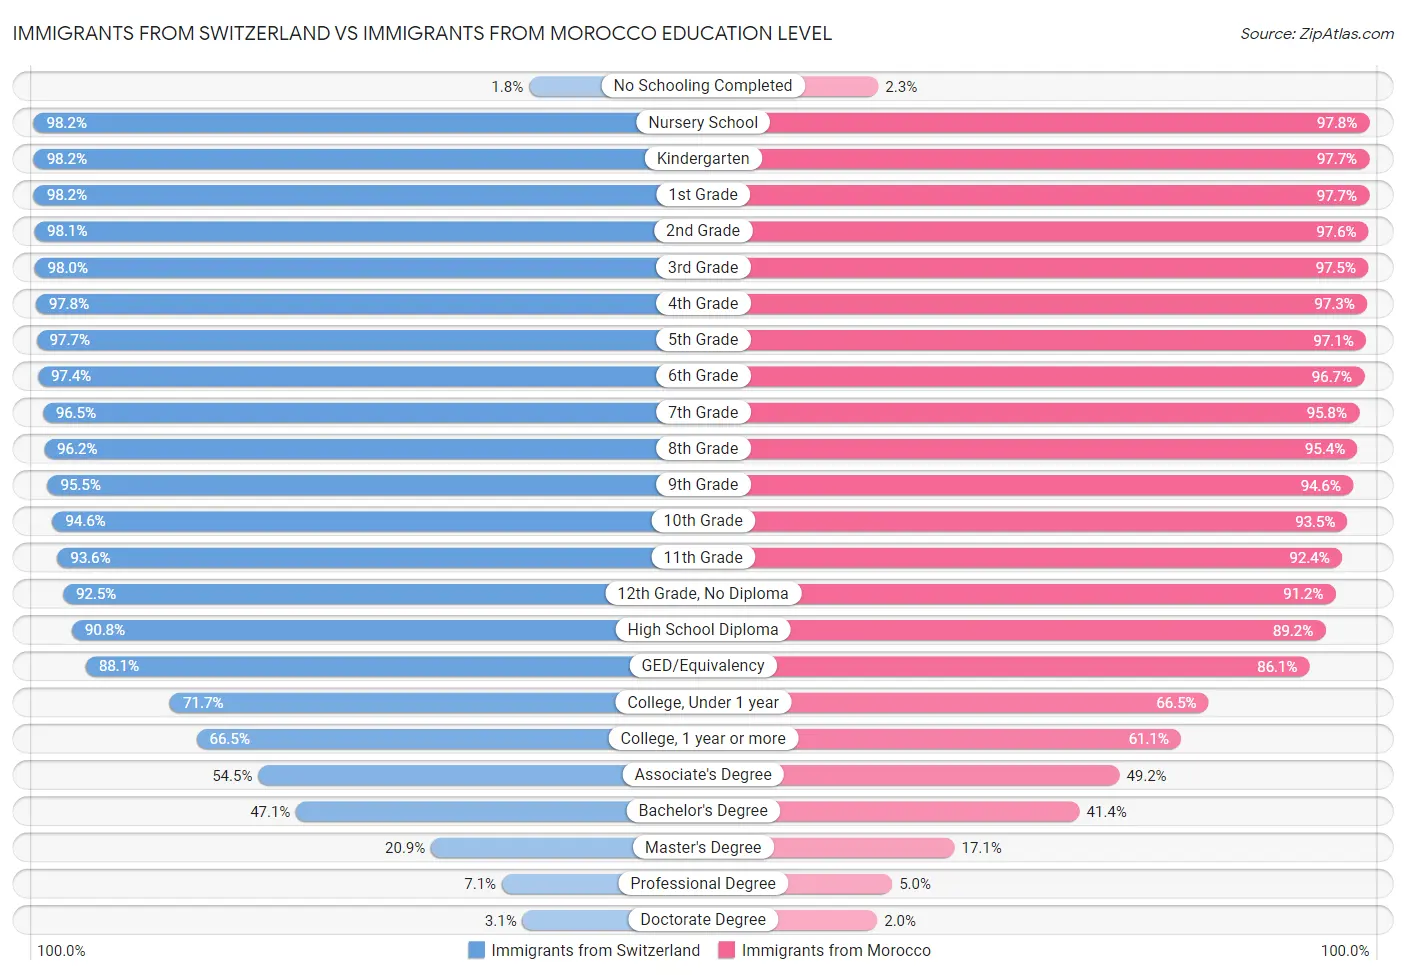 Immigrants from Switzerland vs Immigrants from Morocco Education Level